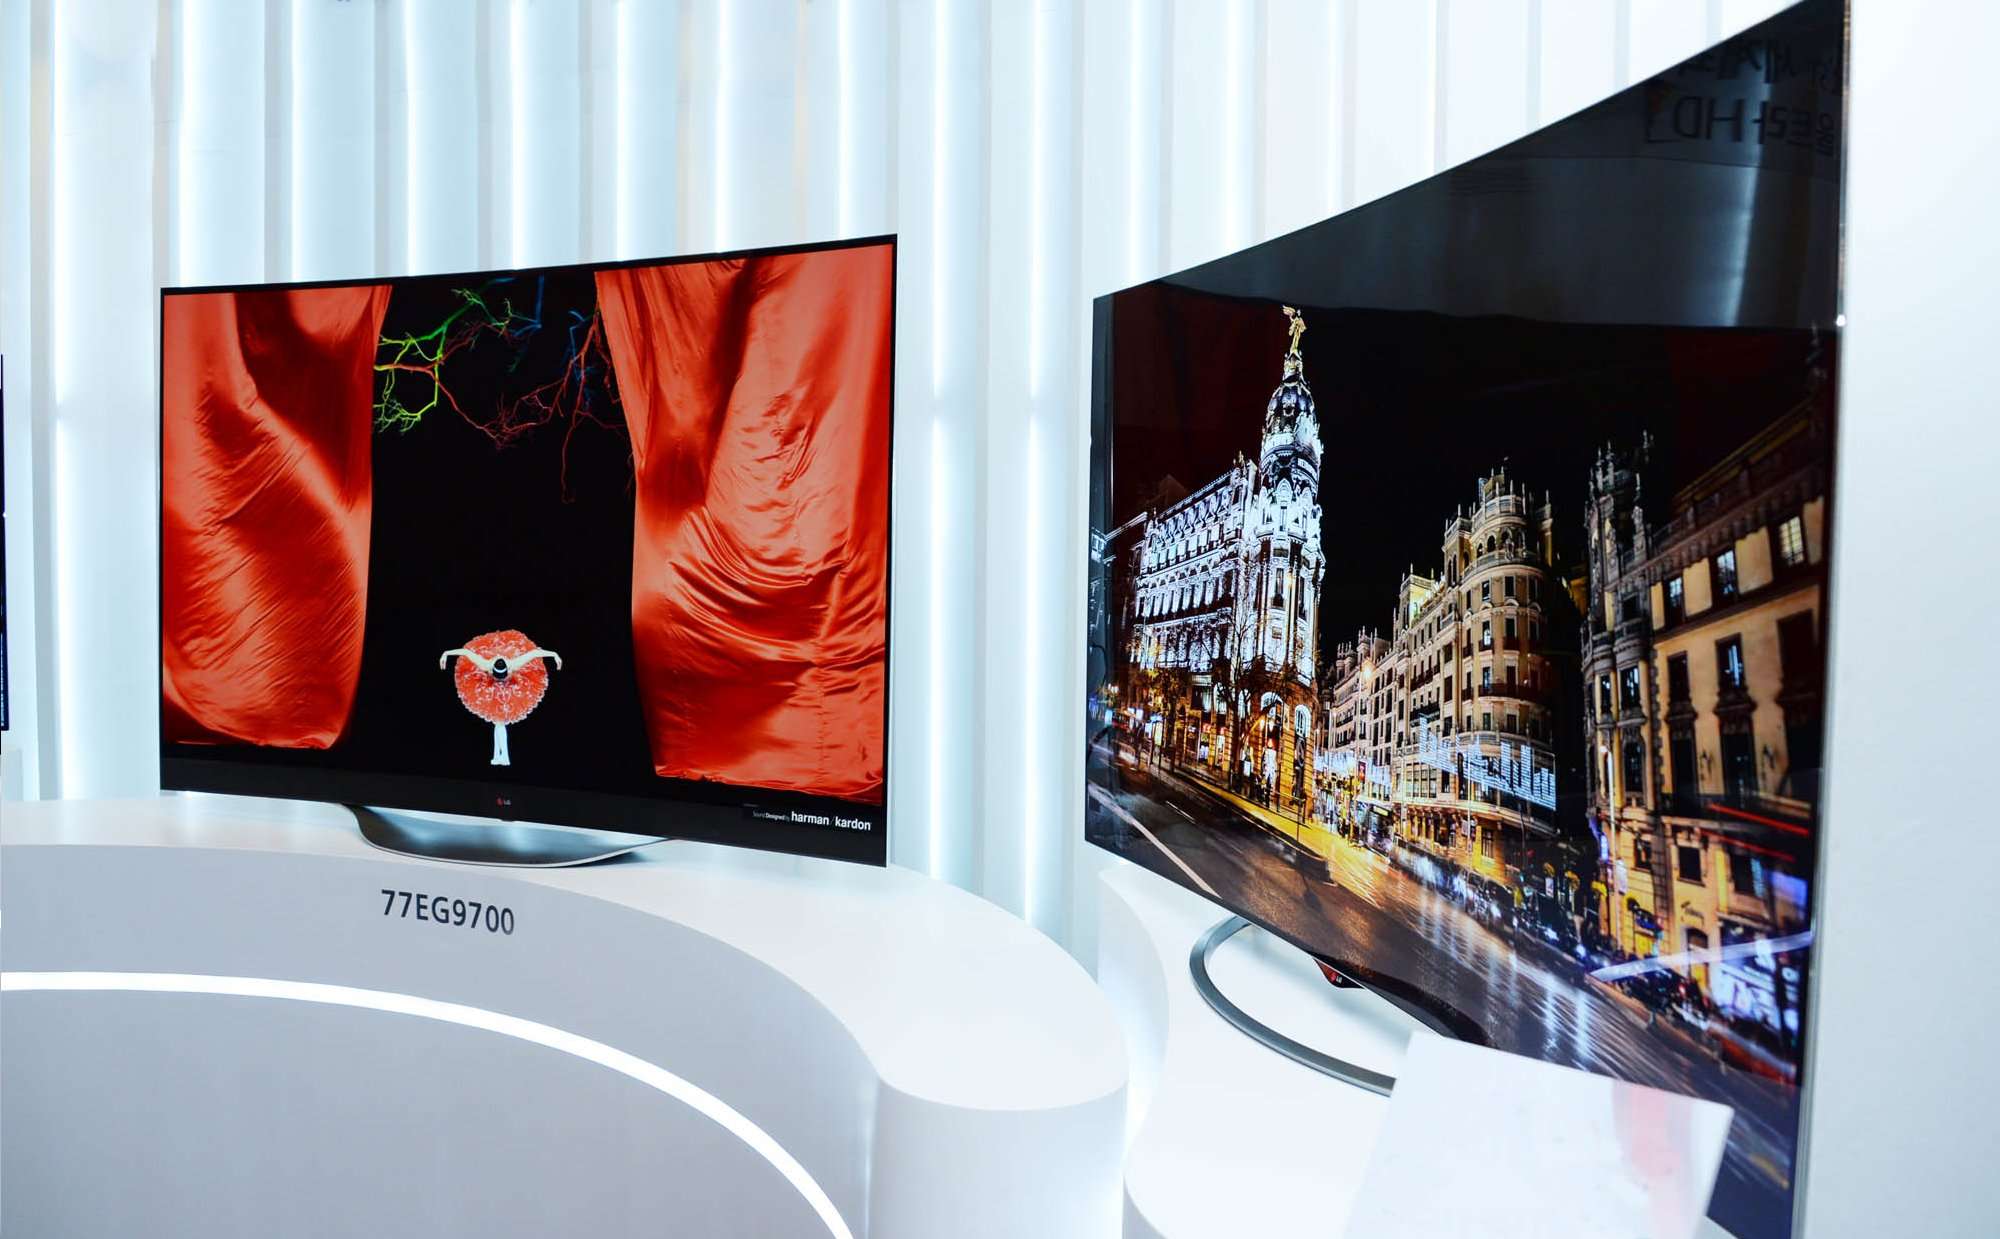 LG FIRST TO COMMERCIALIZE 4K OLED TV